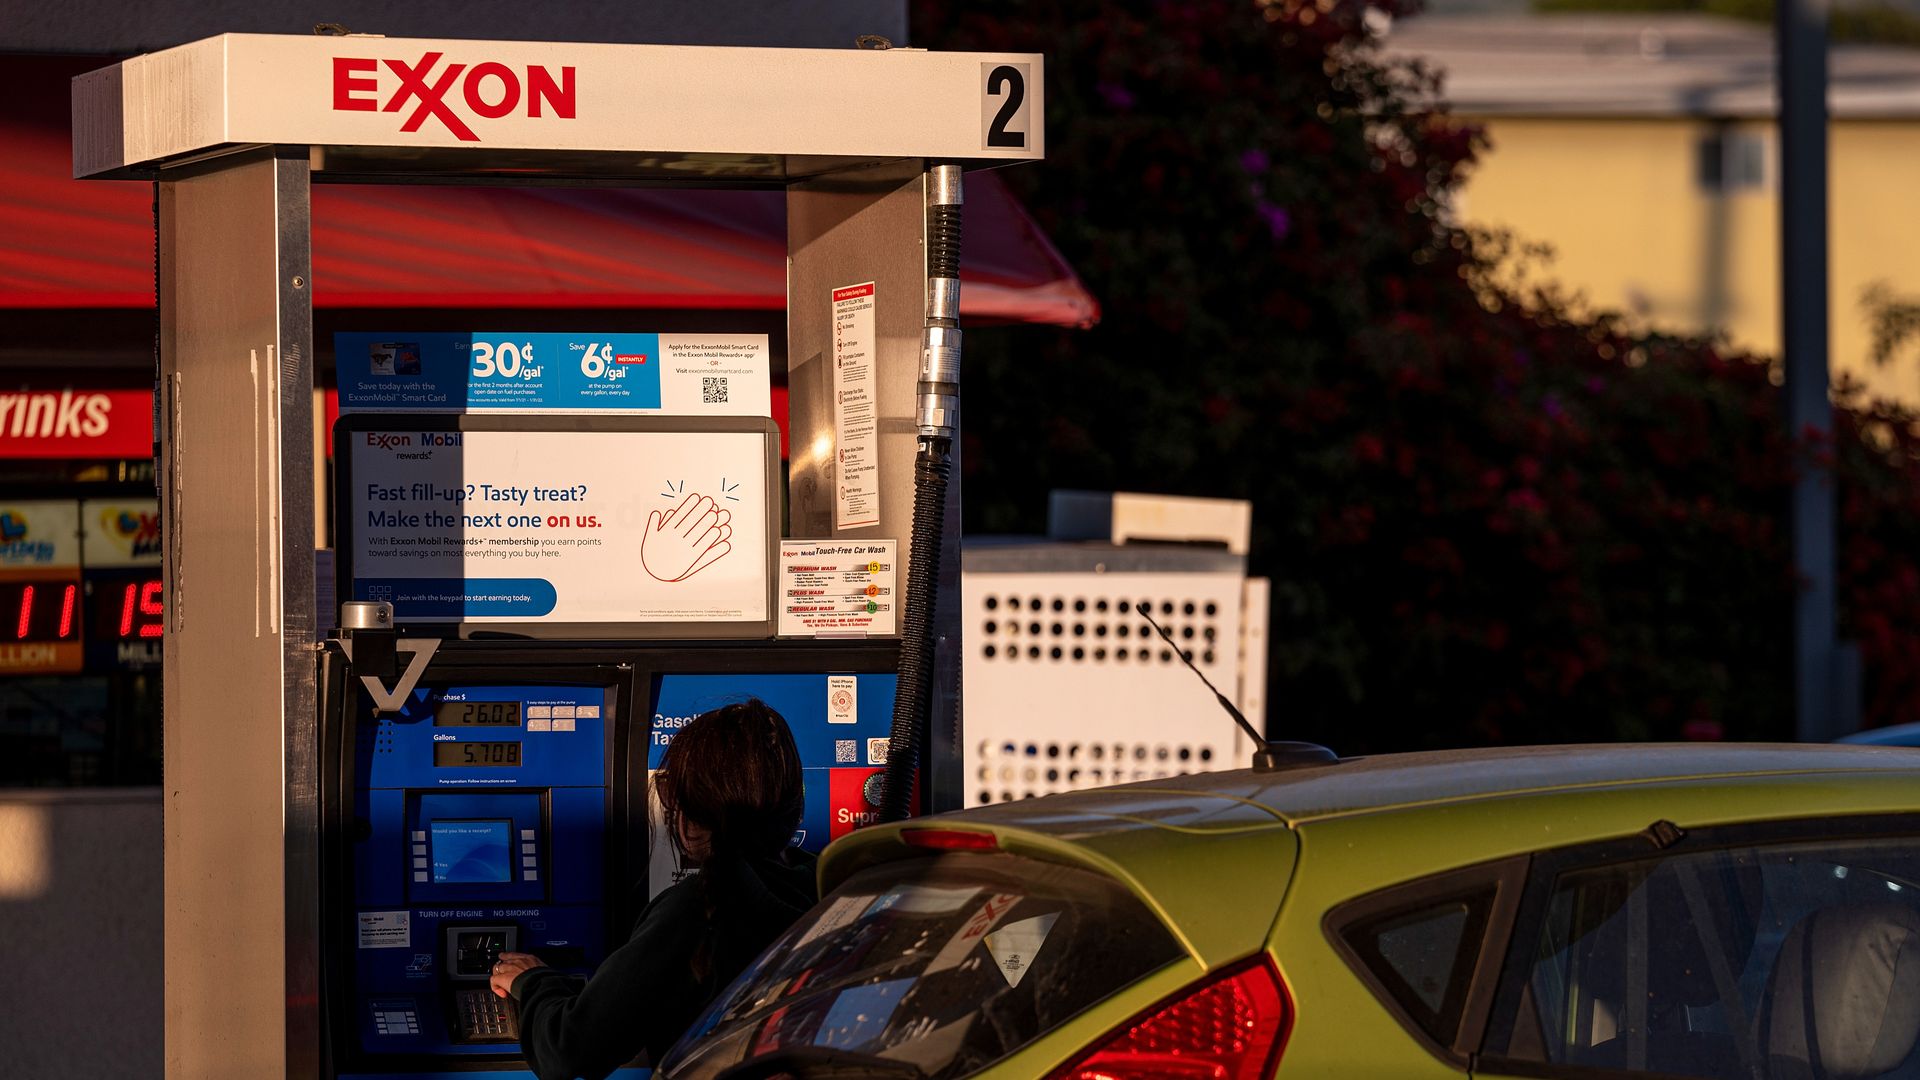 A woman fills up her car with gas at an Exxon gas station.